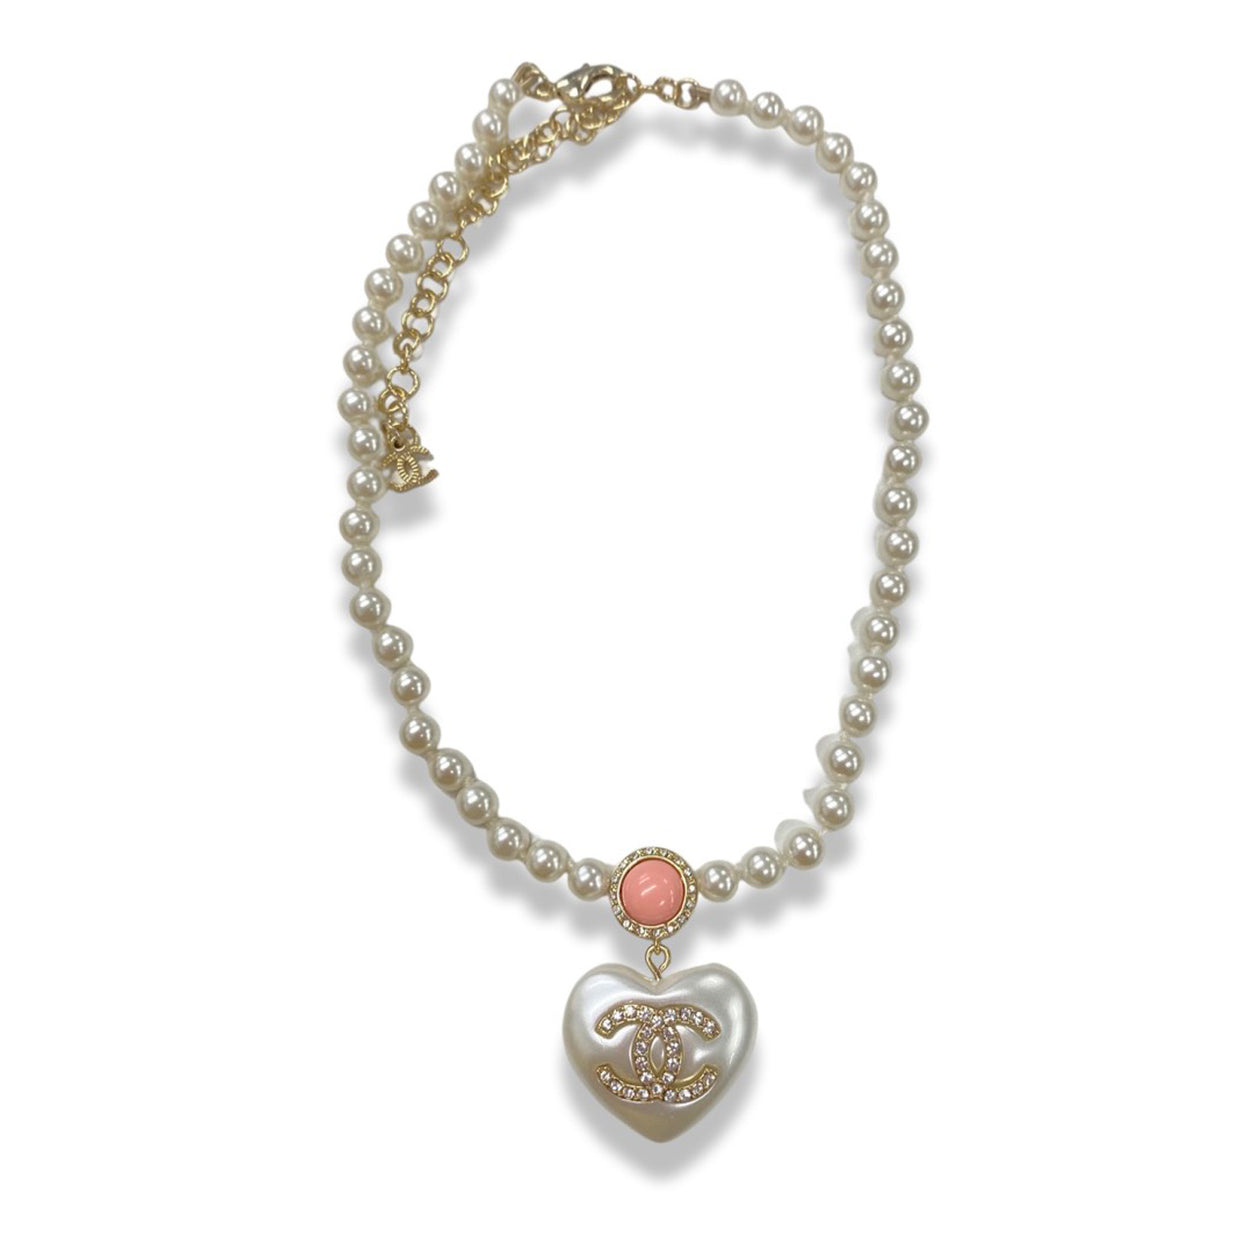 Inspired by CC Necklace with Chanel White Pearl Heart